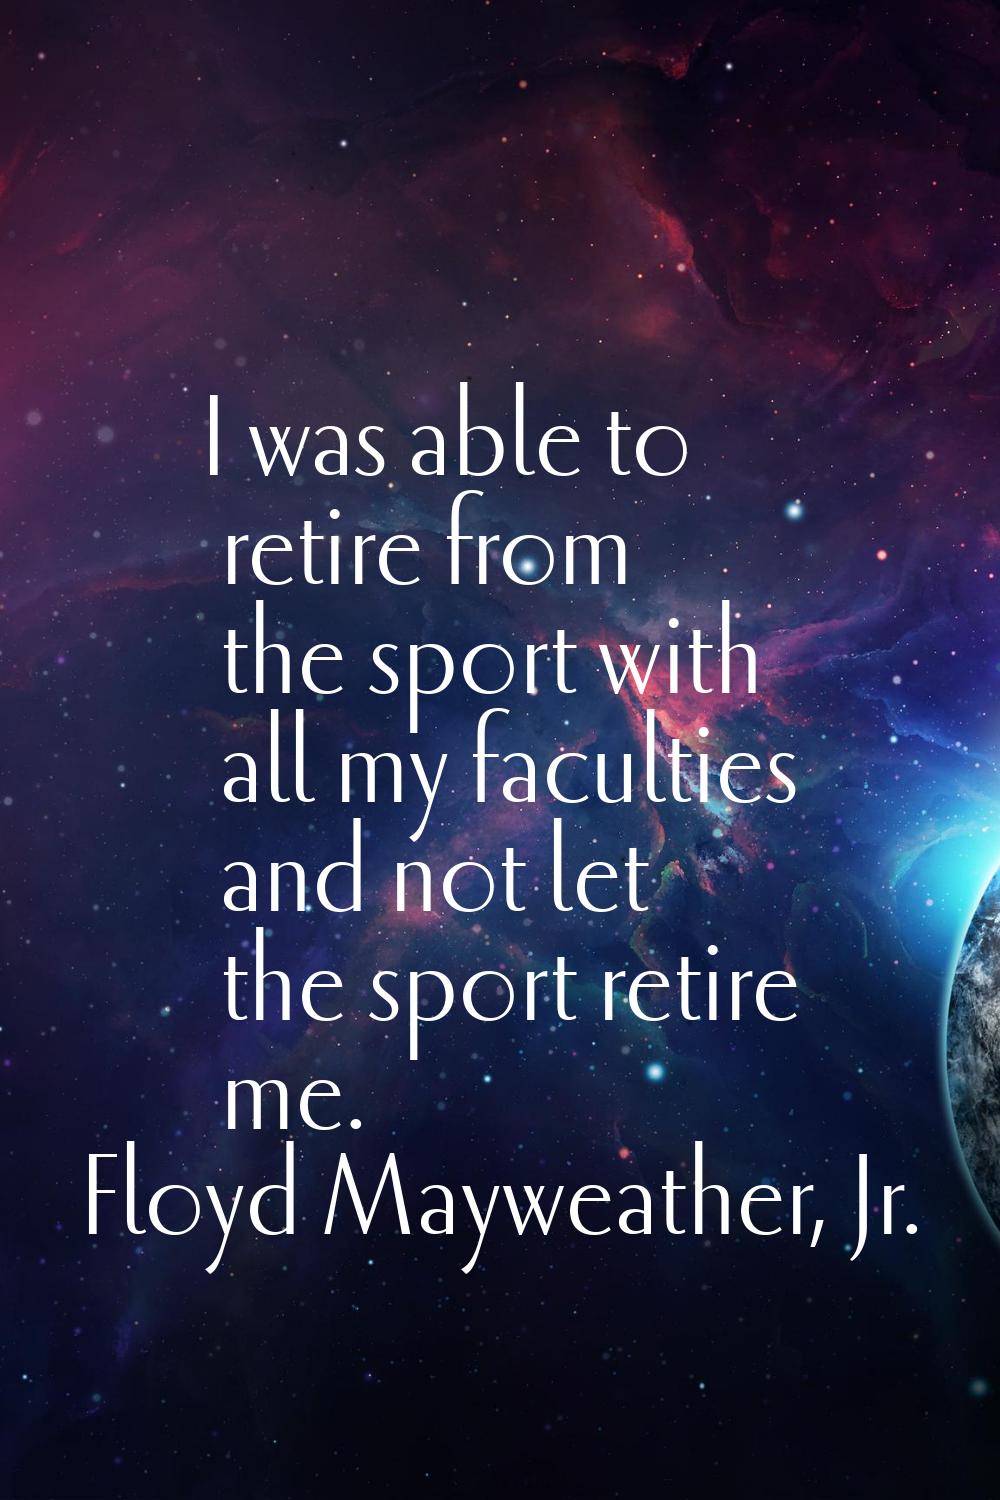 I was able to retire from the sport with all my faculties and not let the sport retire me.